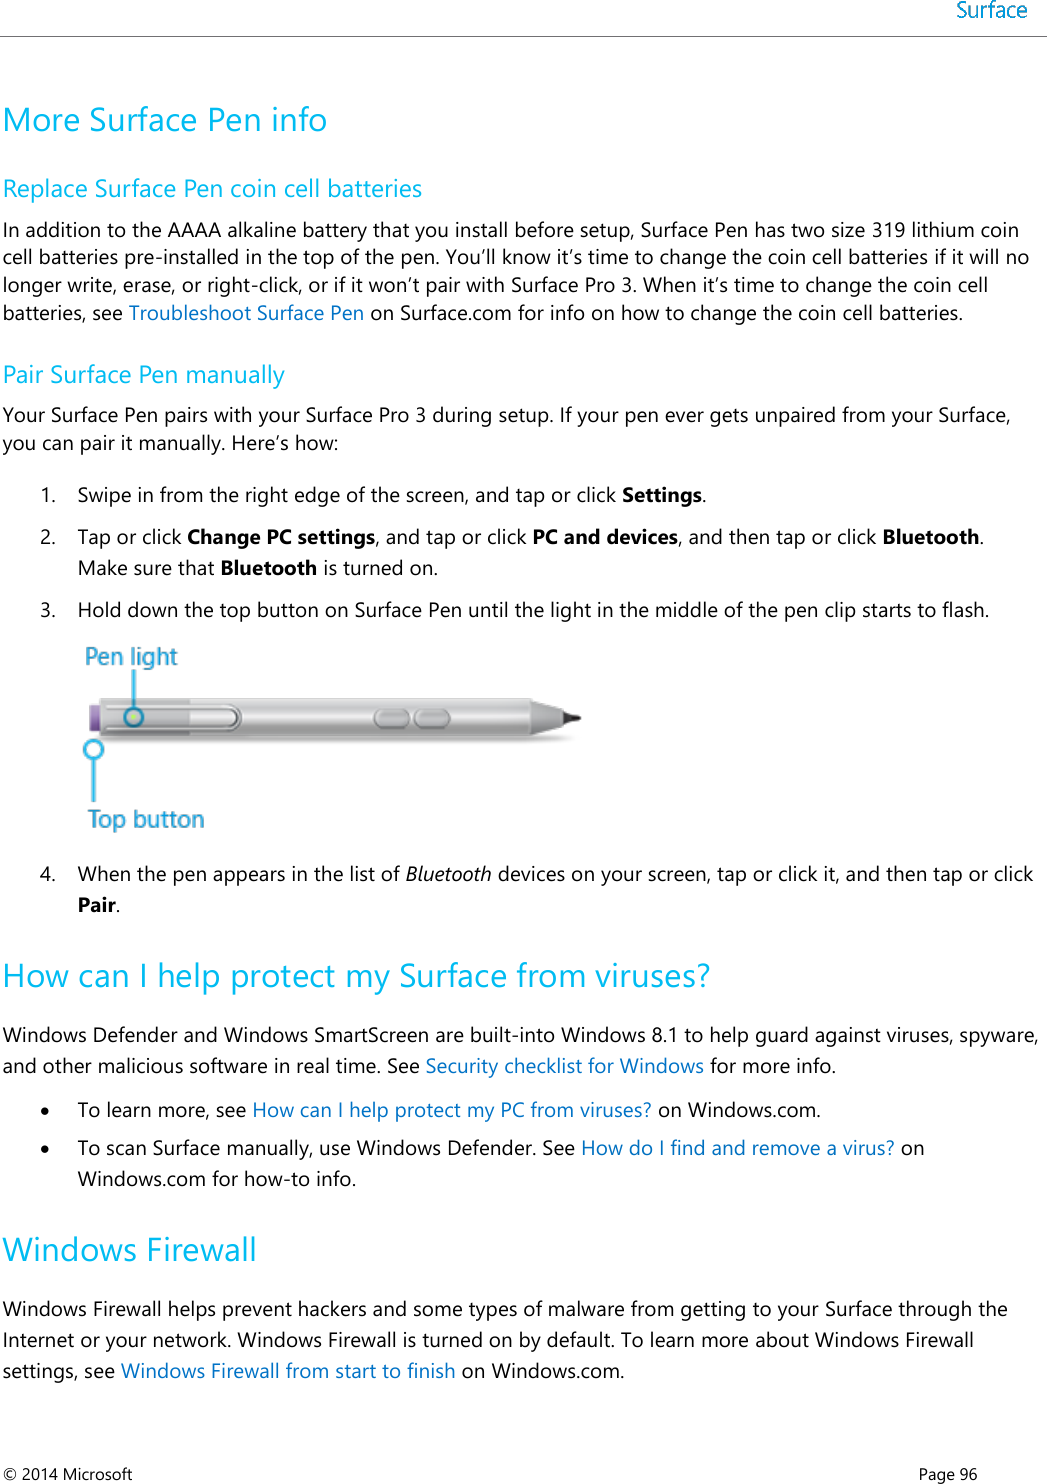  © 2014 Microsoft      Page 96  More Surface Pen info Replace Surface Pen coin cell batteries In addition to the AAAA alkaline battery that you install before setup, Surface Pen has two size 319 lithium coin cell batteries pre-installed in the top of the pen. You’ll know it’s time to change the coin cell batteries if it will no longer write, erase, or right-click, or if it won’t pair with Surface Pro 3. When it’s time to change the coin cell batteries, see Troubleshoot Surface Pen on Surface.com for info on how to change the coin cell batteries.  Pair Surface Pen manually Your Surface Pen pairs with your Surface Pro 3 during setup. If your pen ever gets unpaired from your Surface, you can pair it manually. Here’s how: 1. Swipe in from the right edge of the screen, and tap or click Settings. 2. Tap or click Change PC settings, and tap or click PC and devices, and then tap or click Bluetooth. Make sure that Bluetooth is turned on. 3. Hold down the top button on Surface Pen until the light in the middle of the pen clip starts to flash.  4. When the pen appears in the list of Bluetooth devices on your screen, tap or click it, and then tap or click Pair. How can I help protect my Surface from viruses? Windows Defender and Windows SmartScreen are built-into Windows 8.1 to help guard against viruses, spyware, and other malicious software in real time. See Security checklist for Windows for more info.   To learn more, see How can I help protect my PC from viruses? on Windows.com.   To scan Surface manually, use Windows Defender. See How do I find and remove a virus? on Windows.com for how-to info.  Windows Firewall Windows Firewall helps prevent hackers and some types of malware from getting to your Surface through the Internet or your network. Windows Firewall is turned on by default. To learn more about Windows Firewall settings, see Windows Firewall from start to finish on Windows.com.  